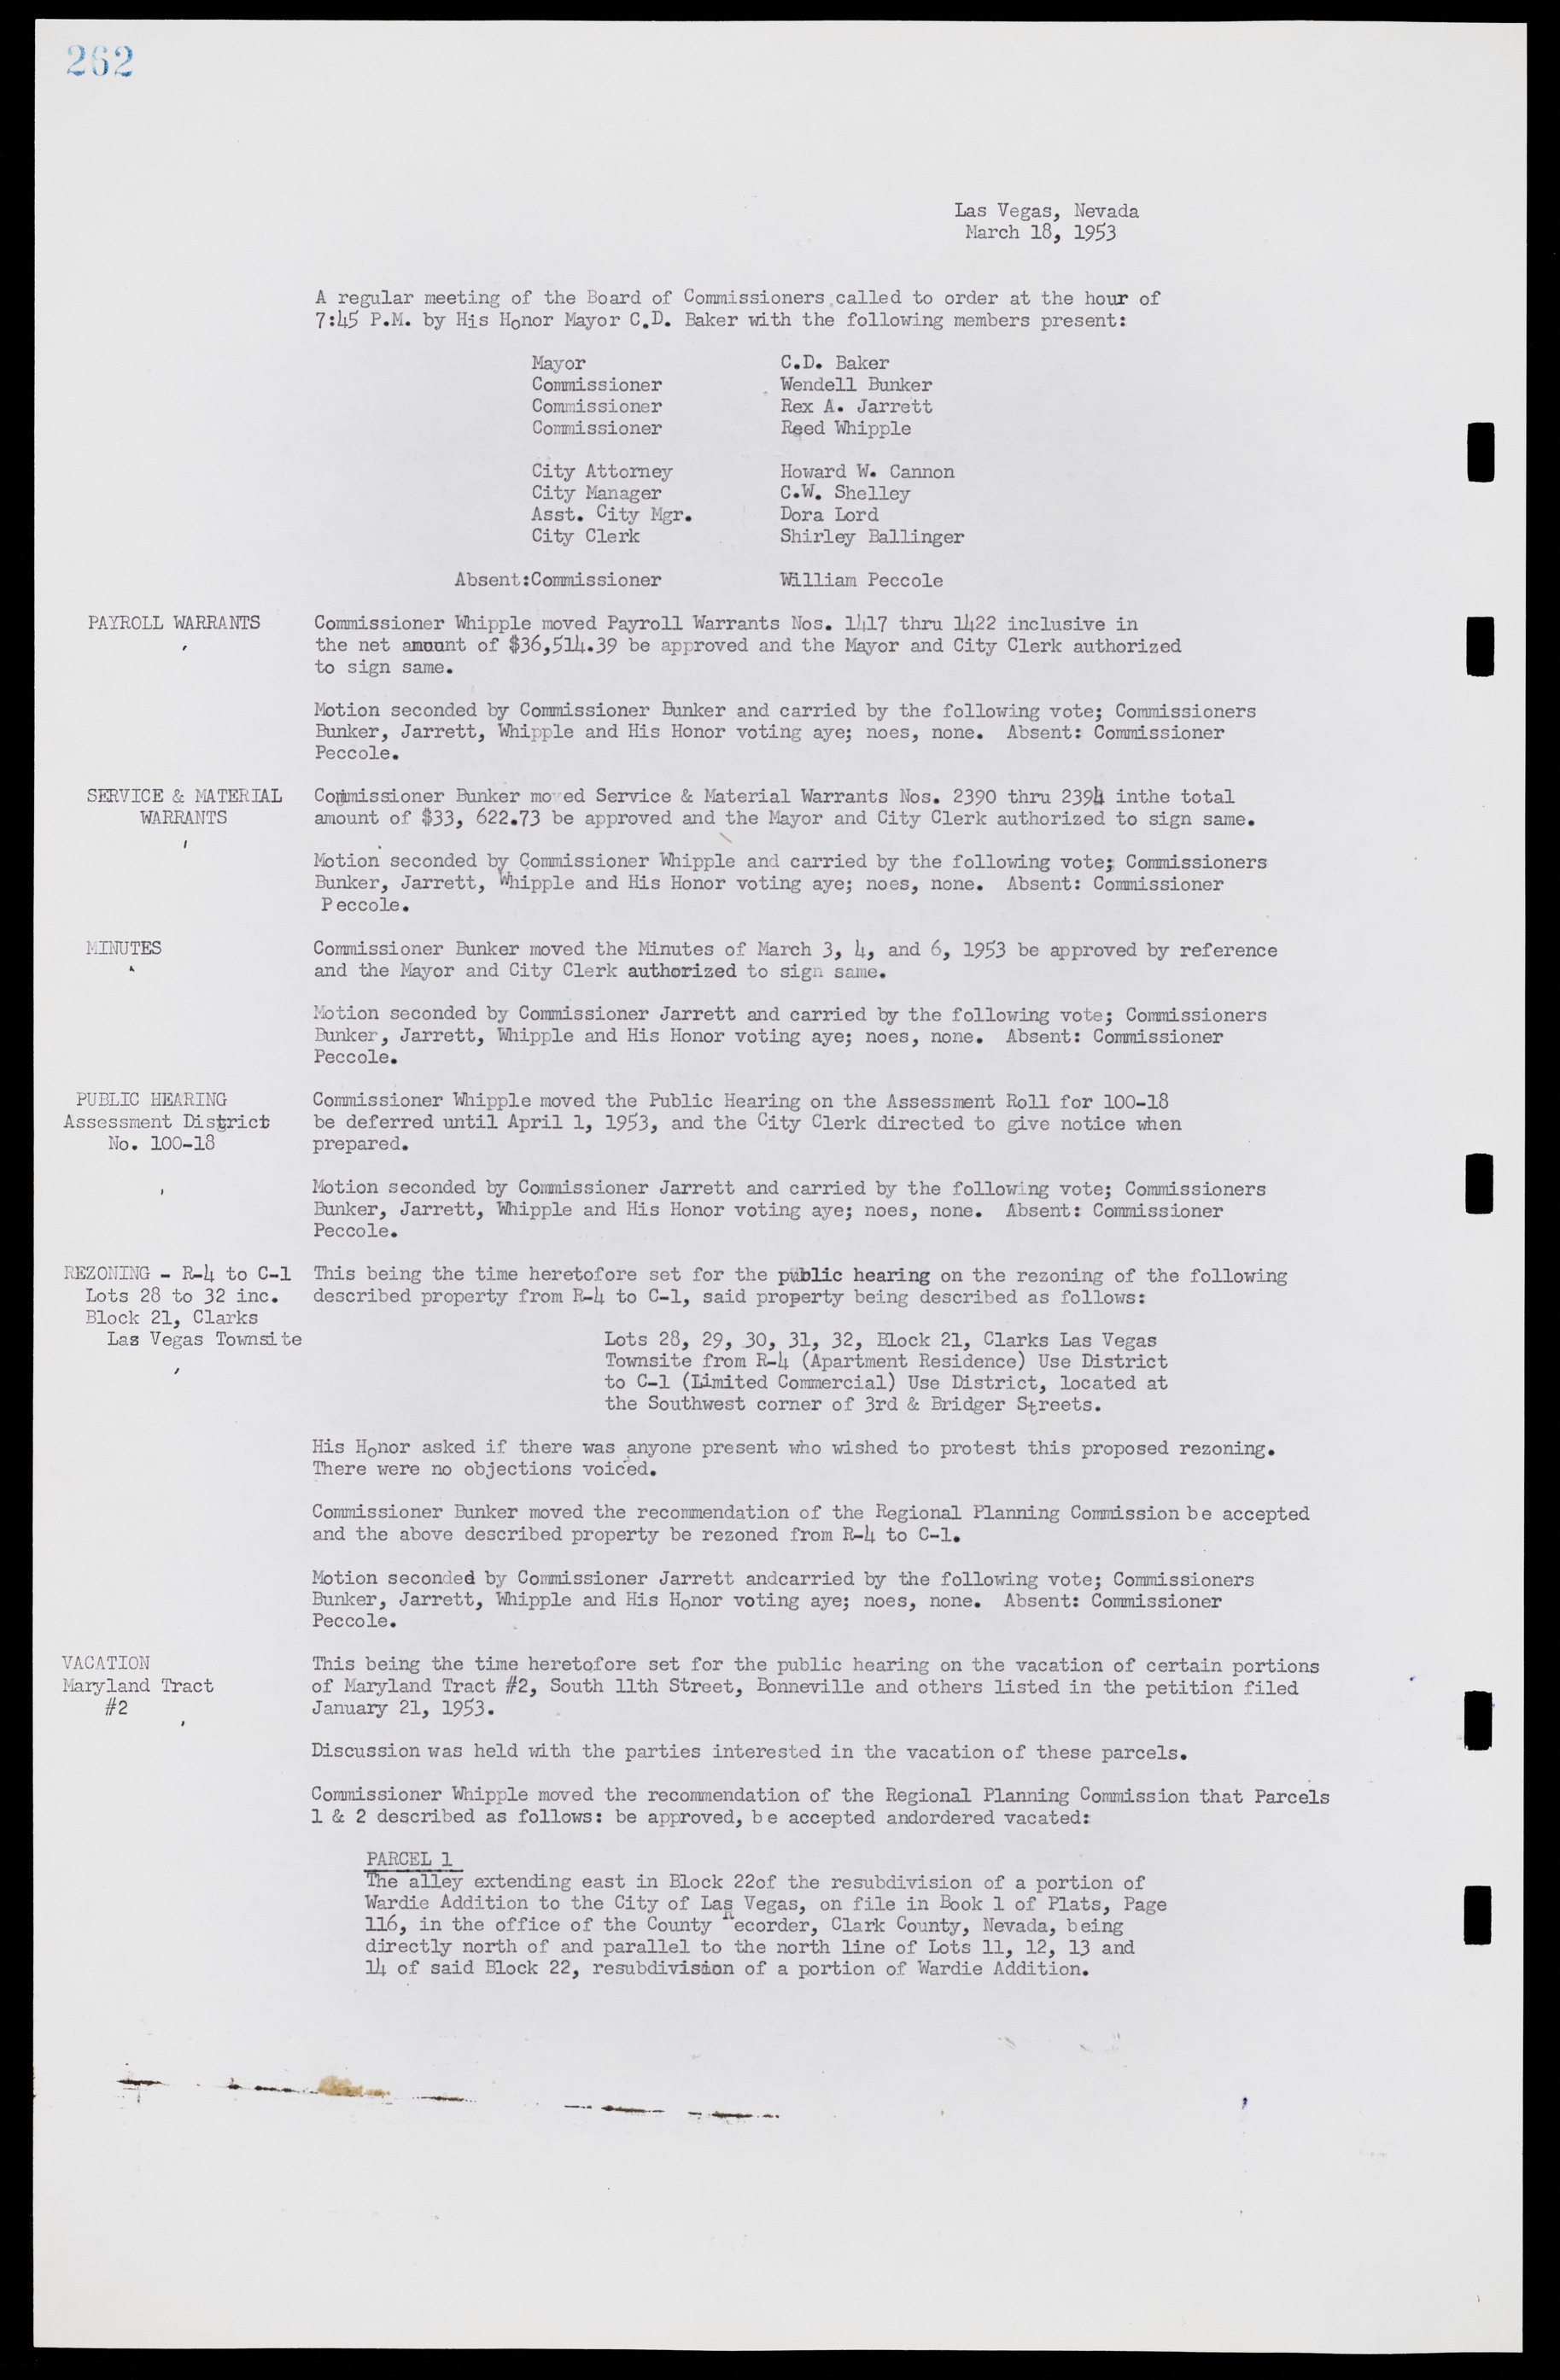 Las Vegas City Commission Minutes, May 26, 1952 to February 17, 1954, lvc000008-278